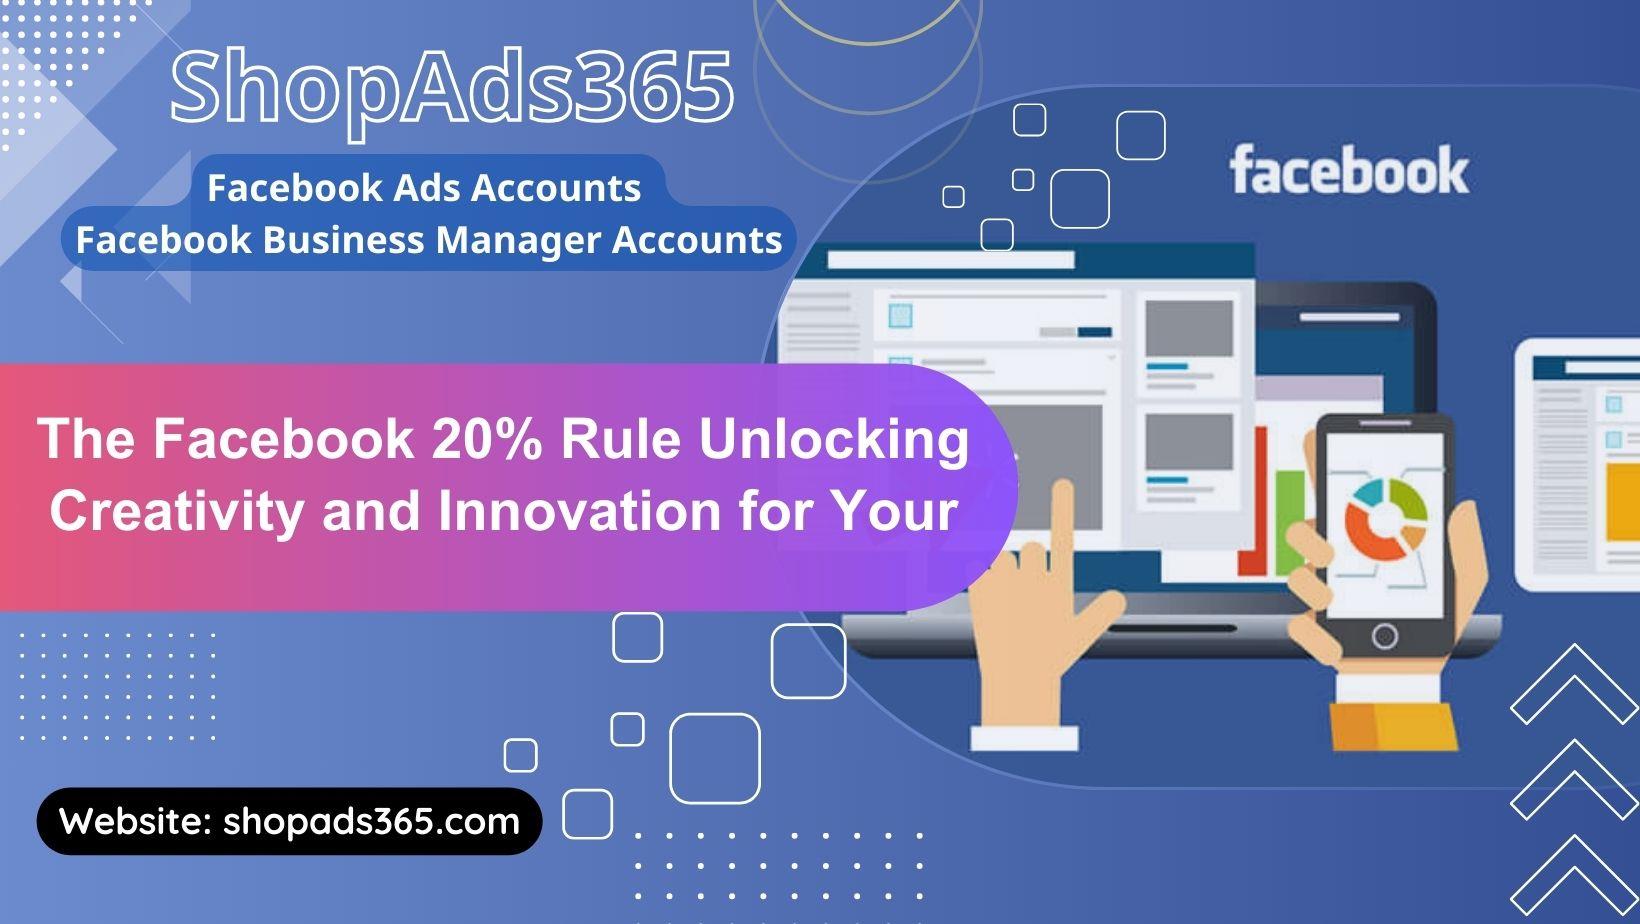 The Facebook 20% Rule Unlocking Creativity and Innovation for Your